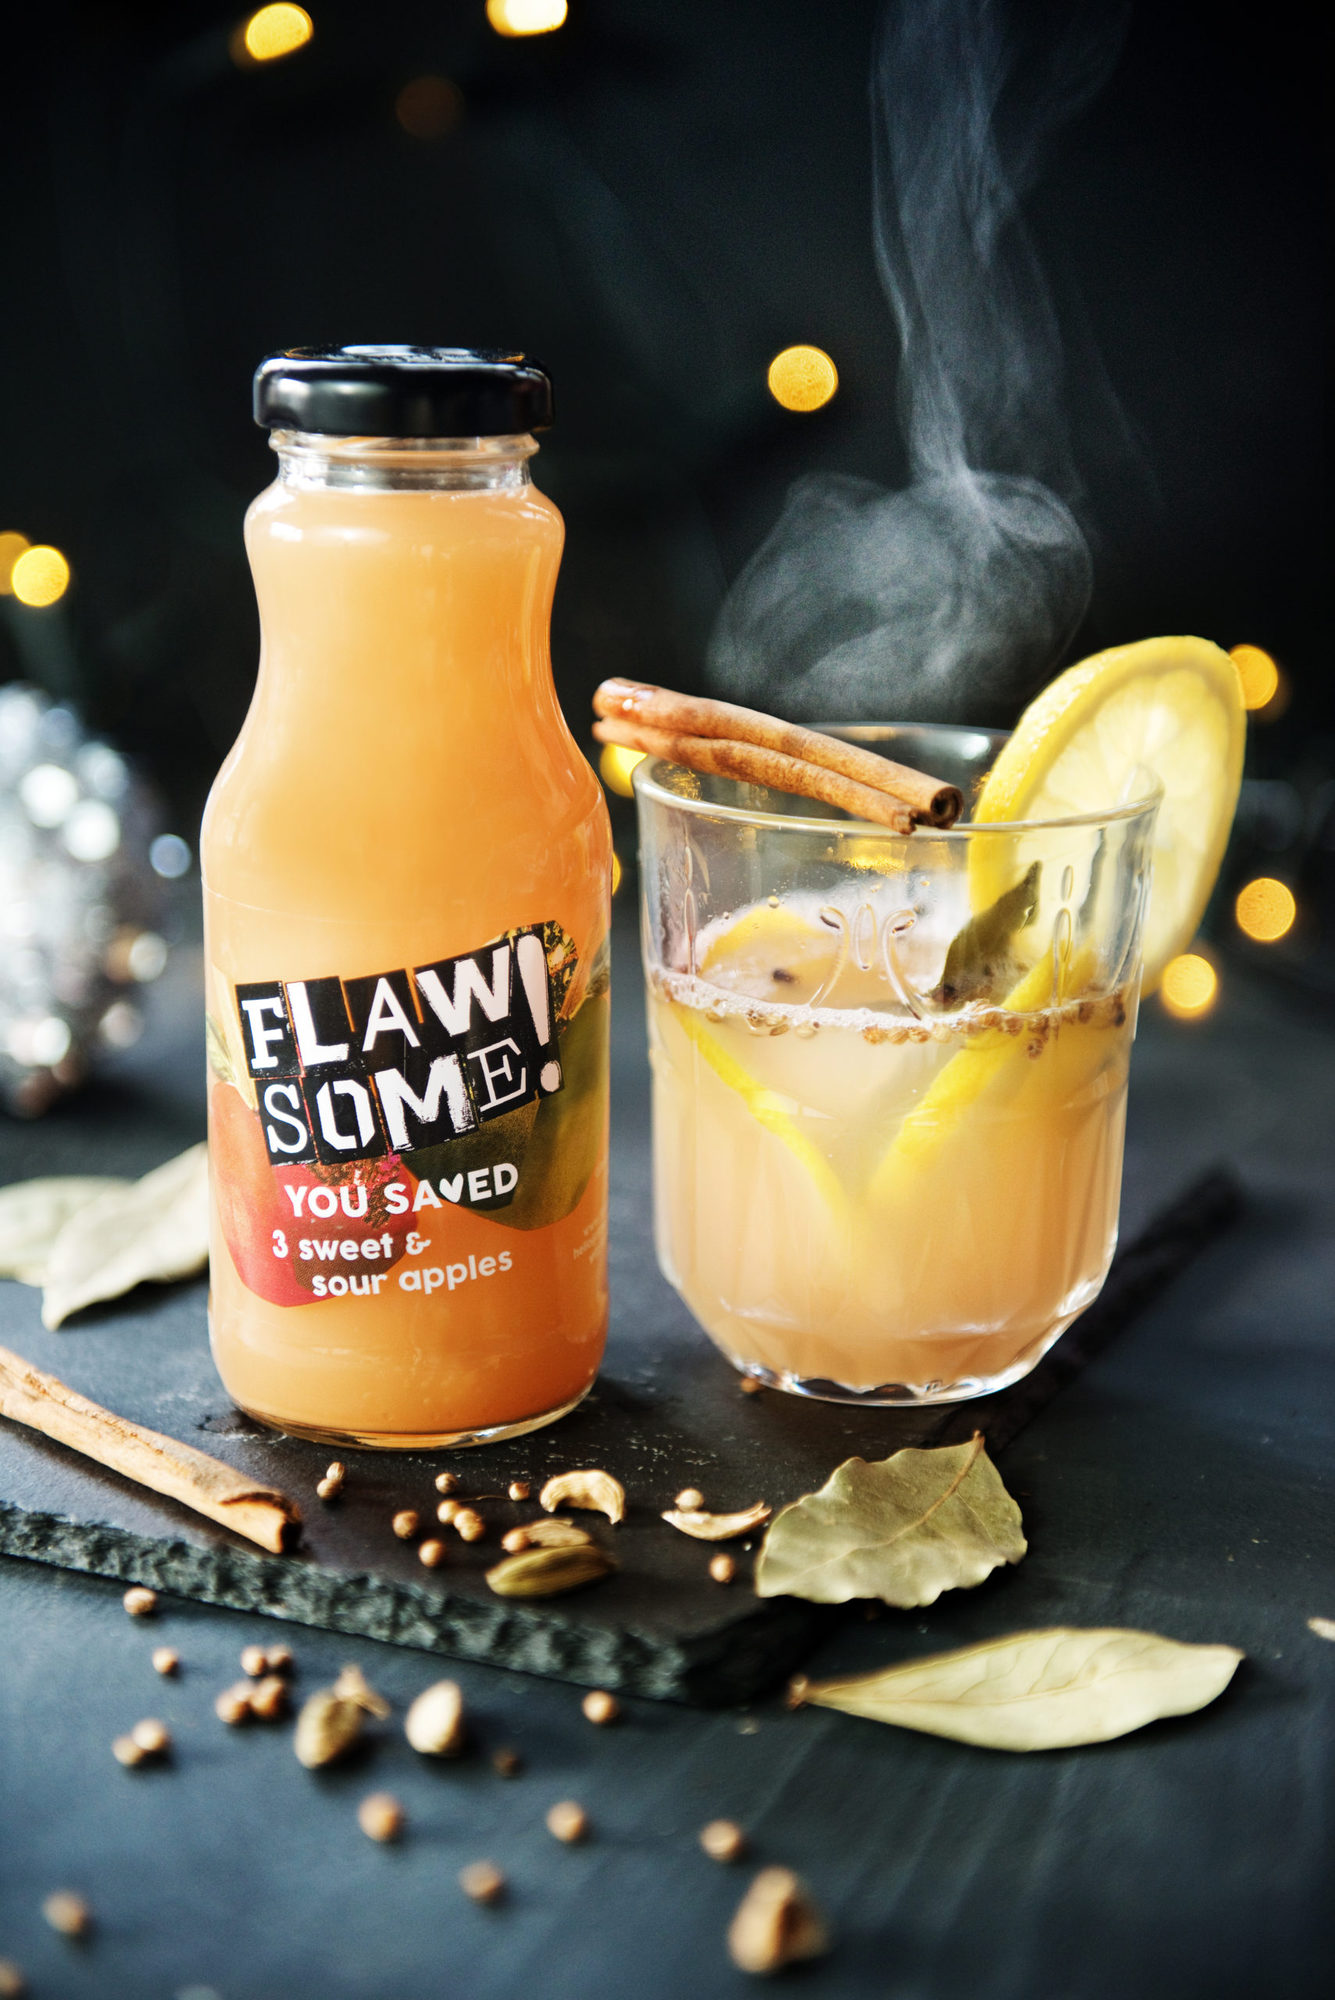 A glass of mulled gin next to a glass bottle of Flawsome!